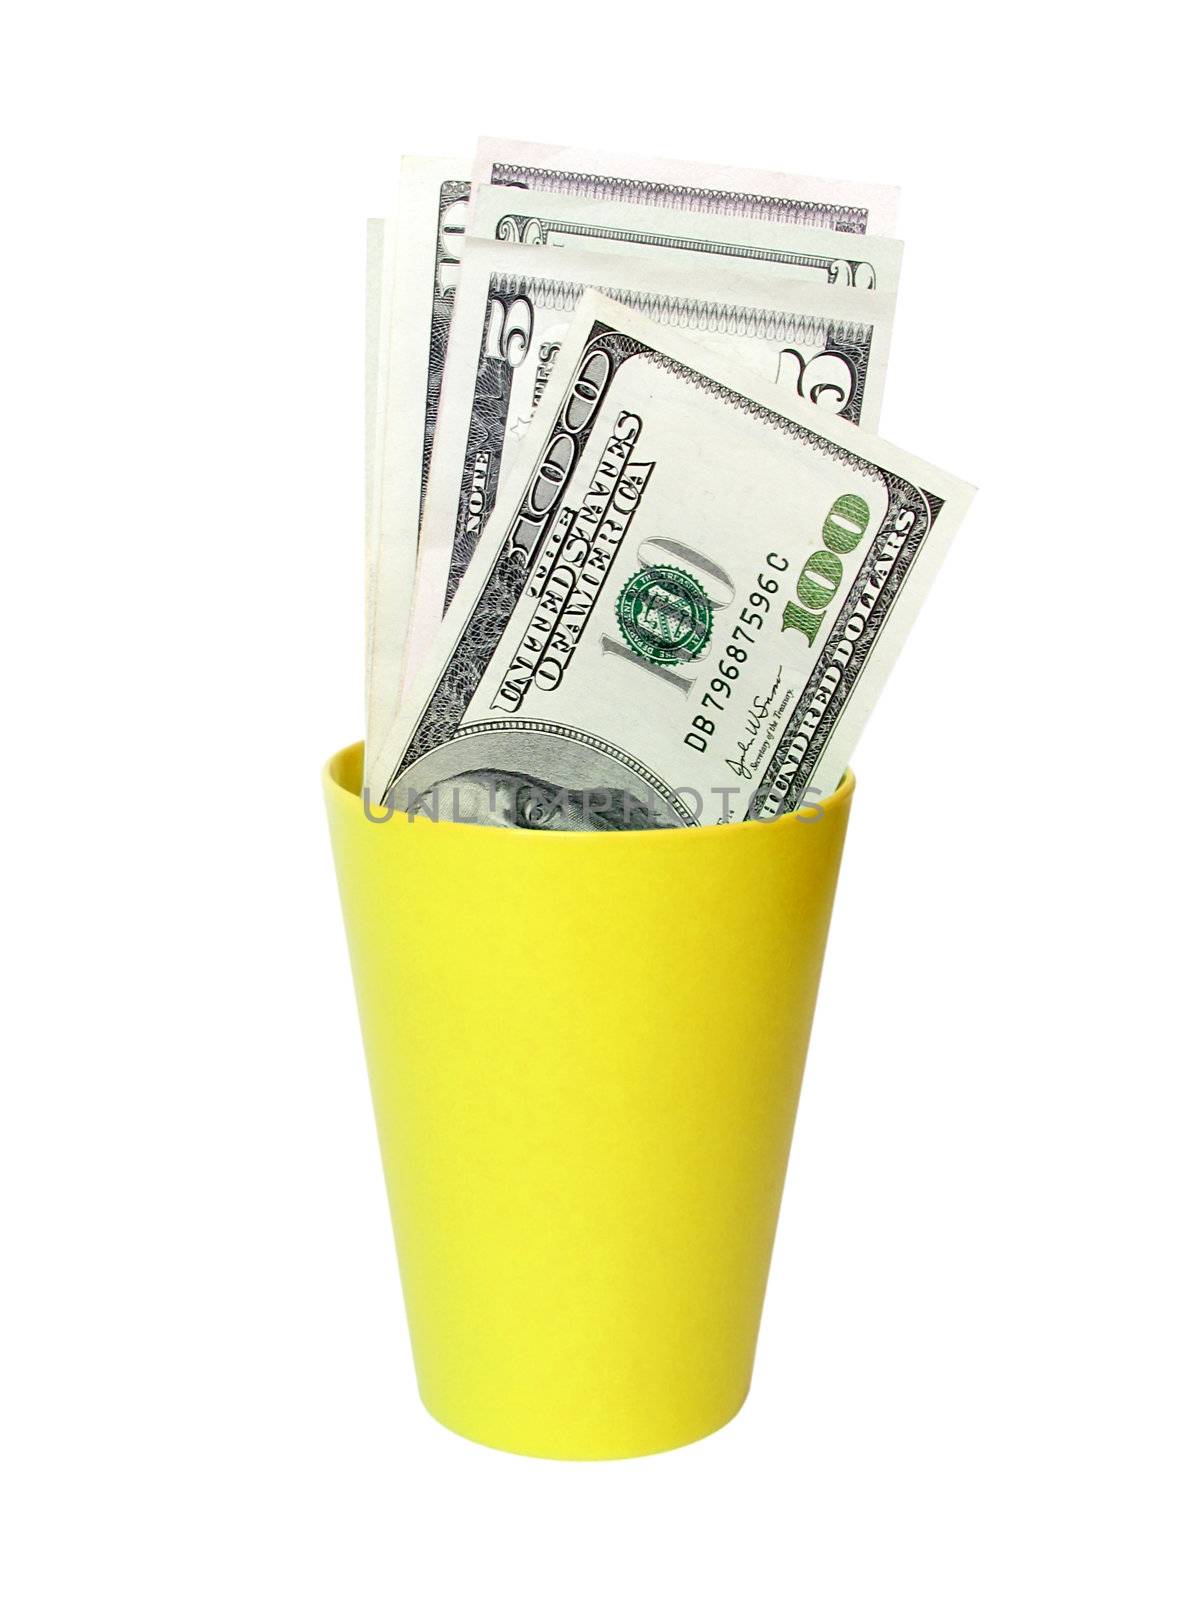 cash in a yellow plastic cup